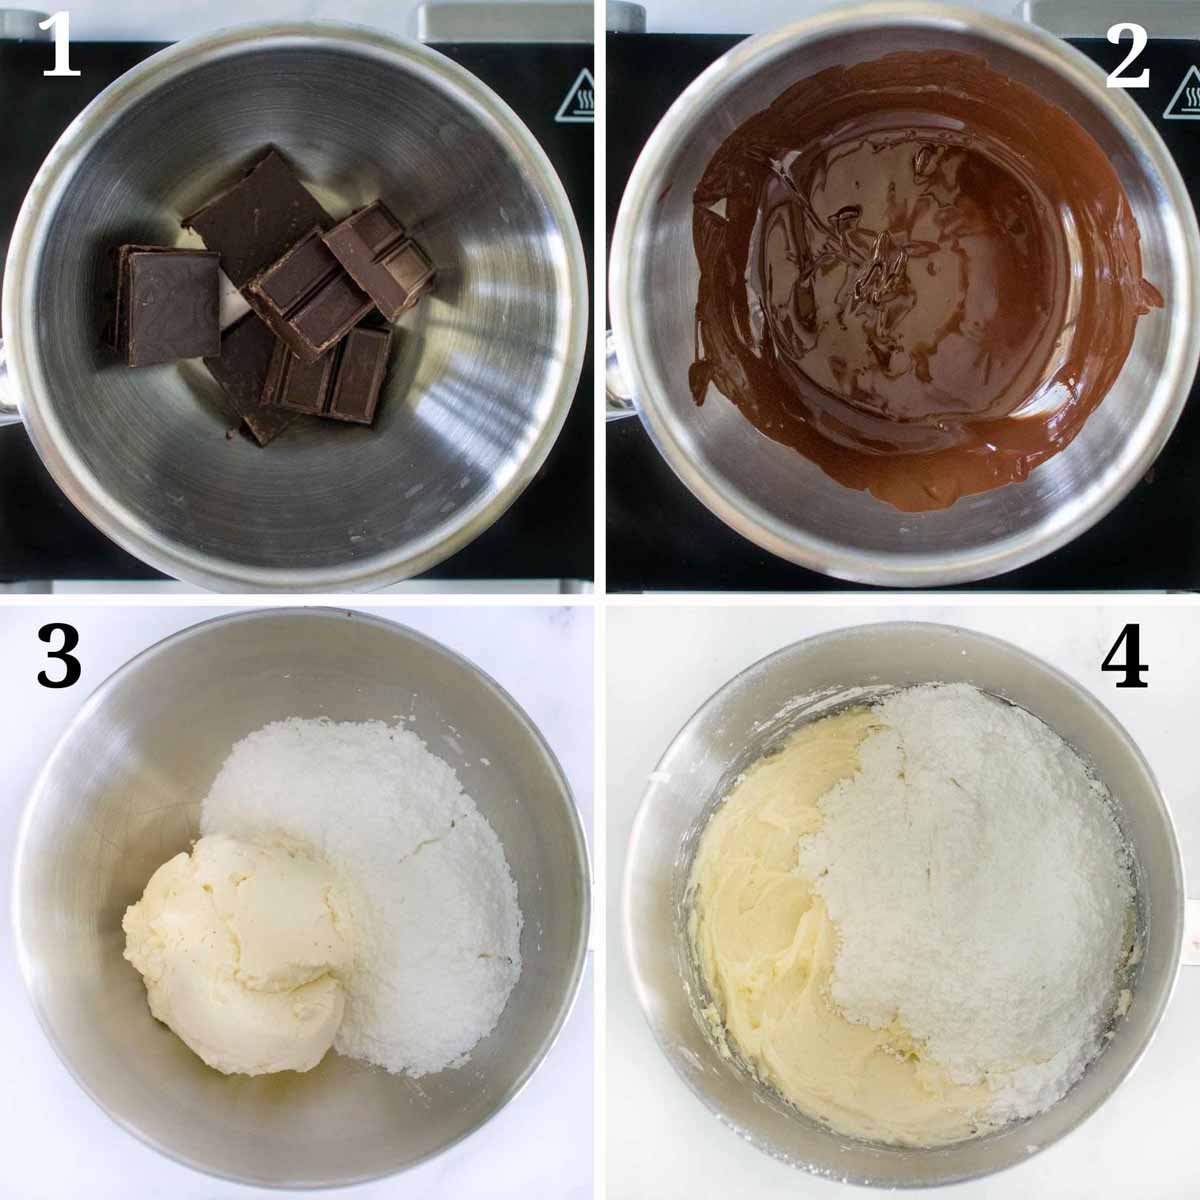 four images showing how to make chocolate frosting